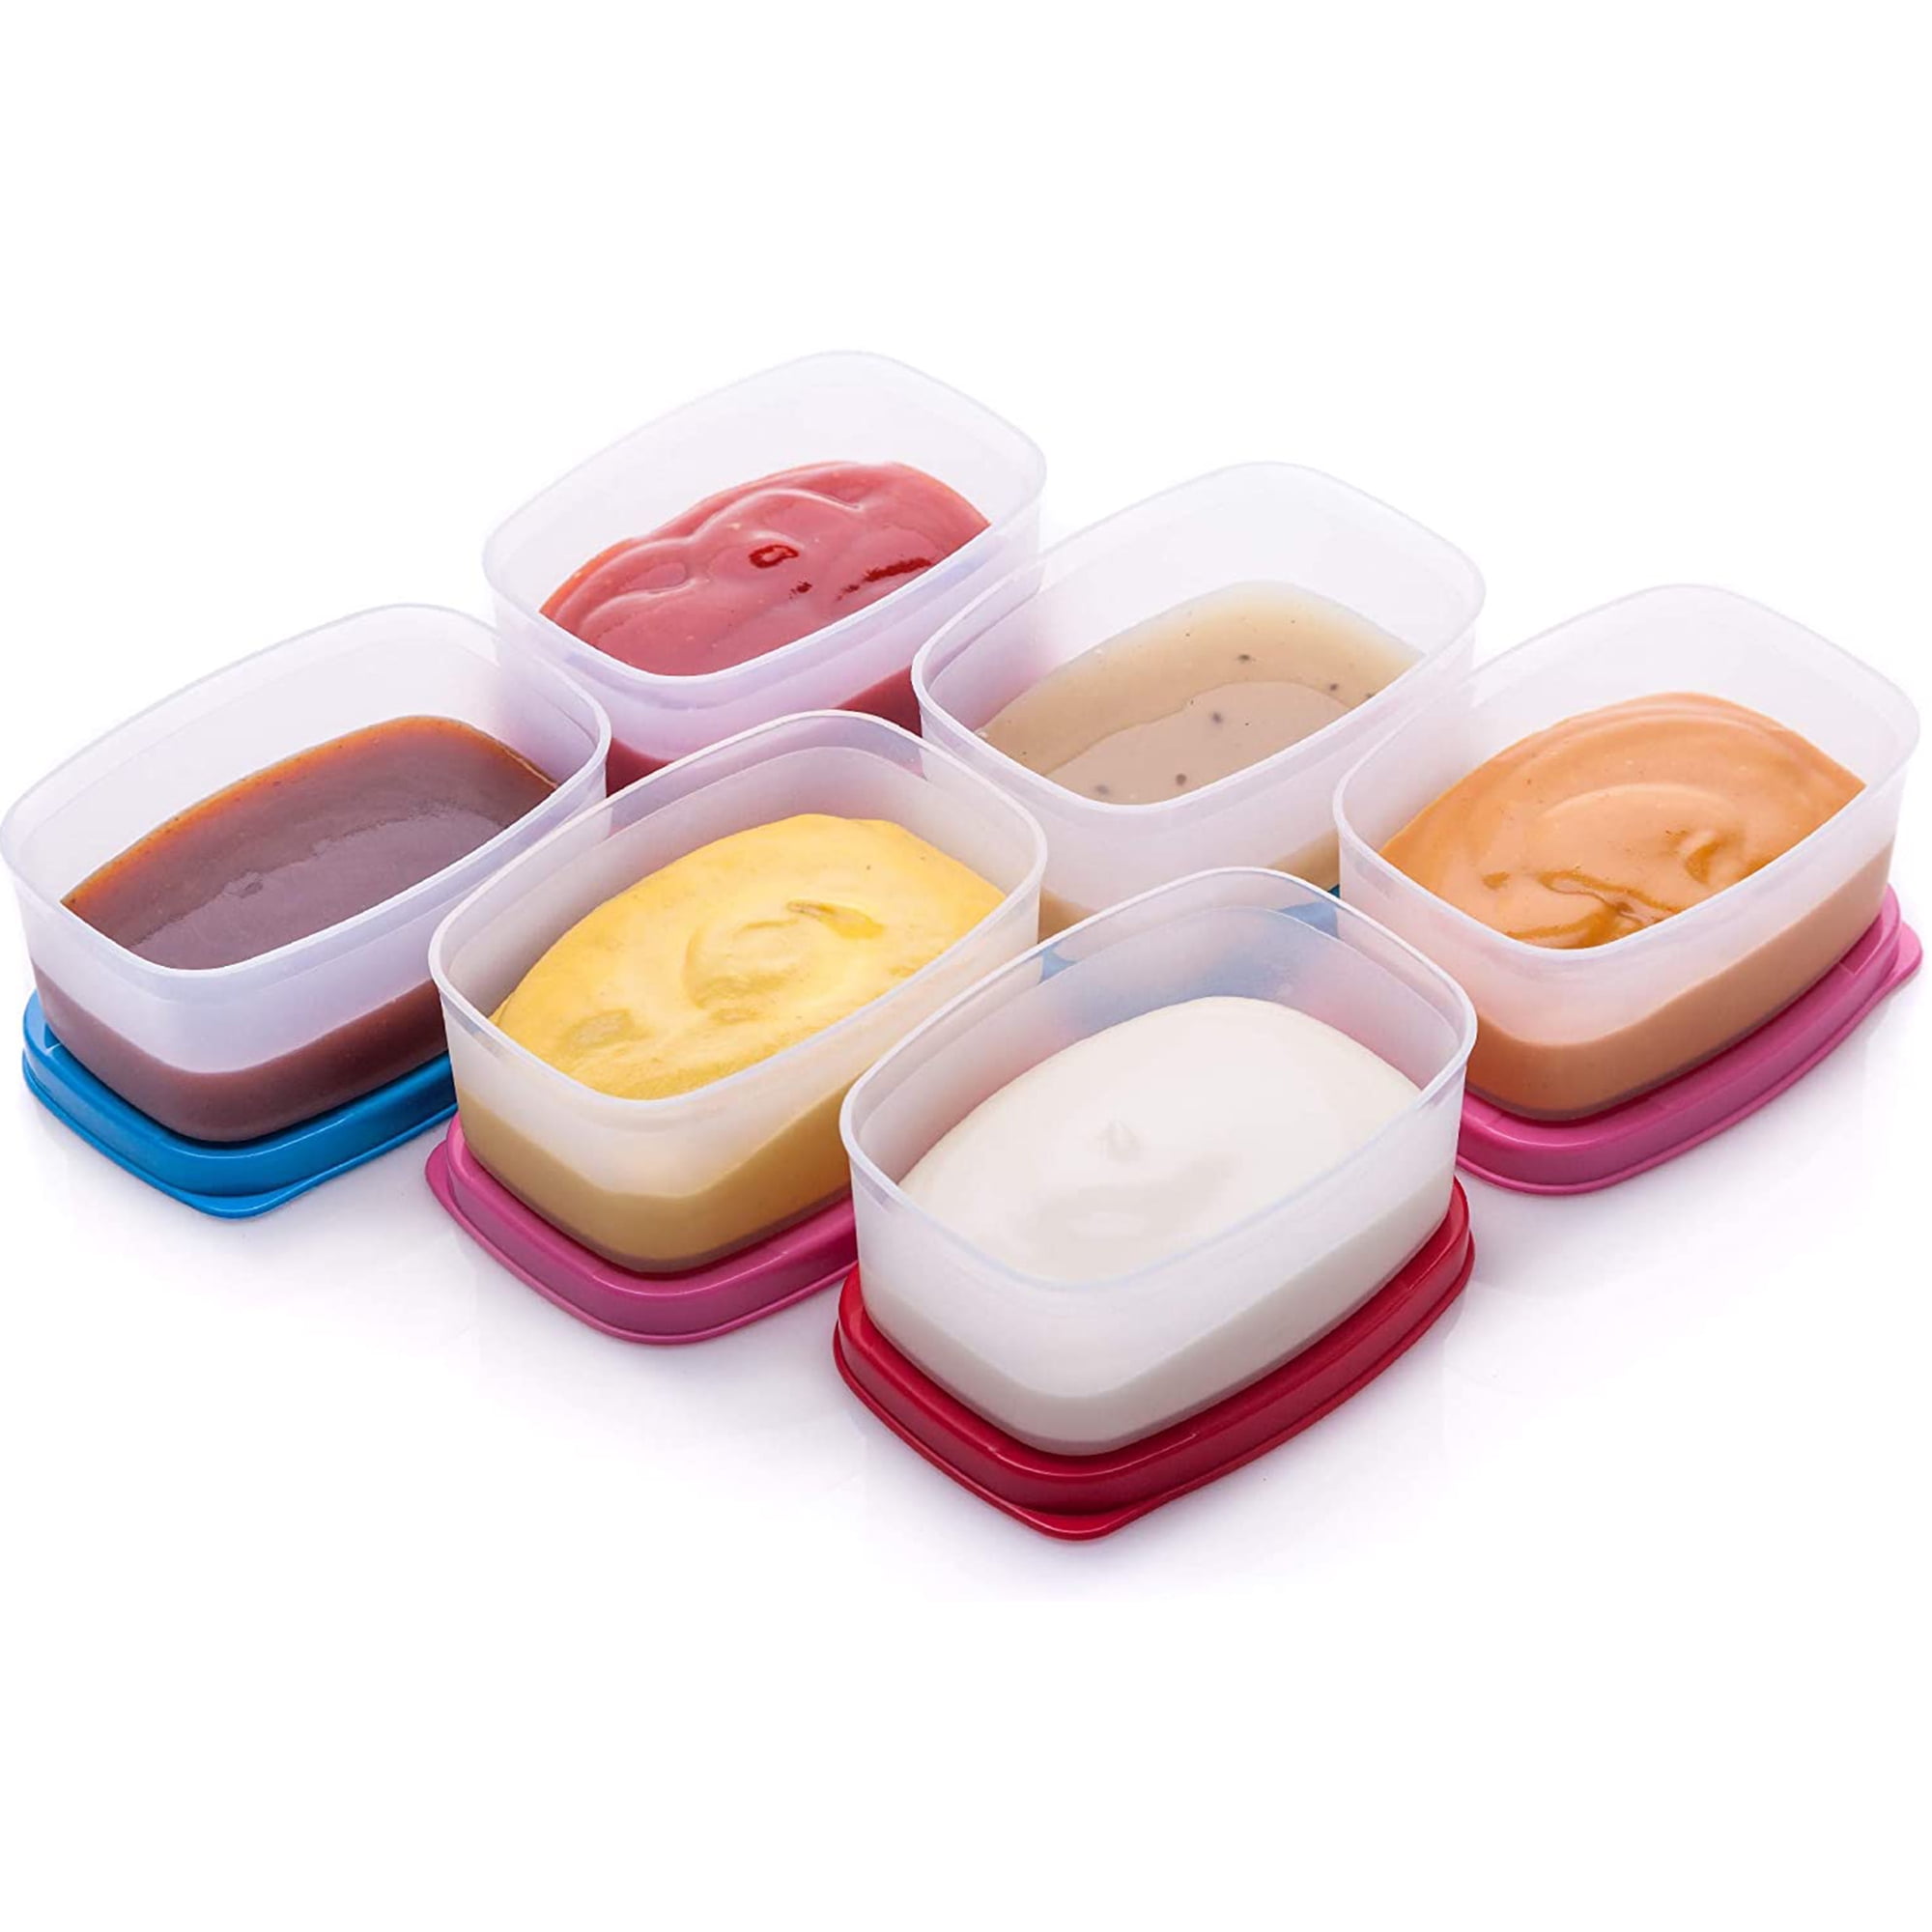 Signora ware Condiment Cups Containers with Lids- 6 pk. 1.3 oz.